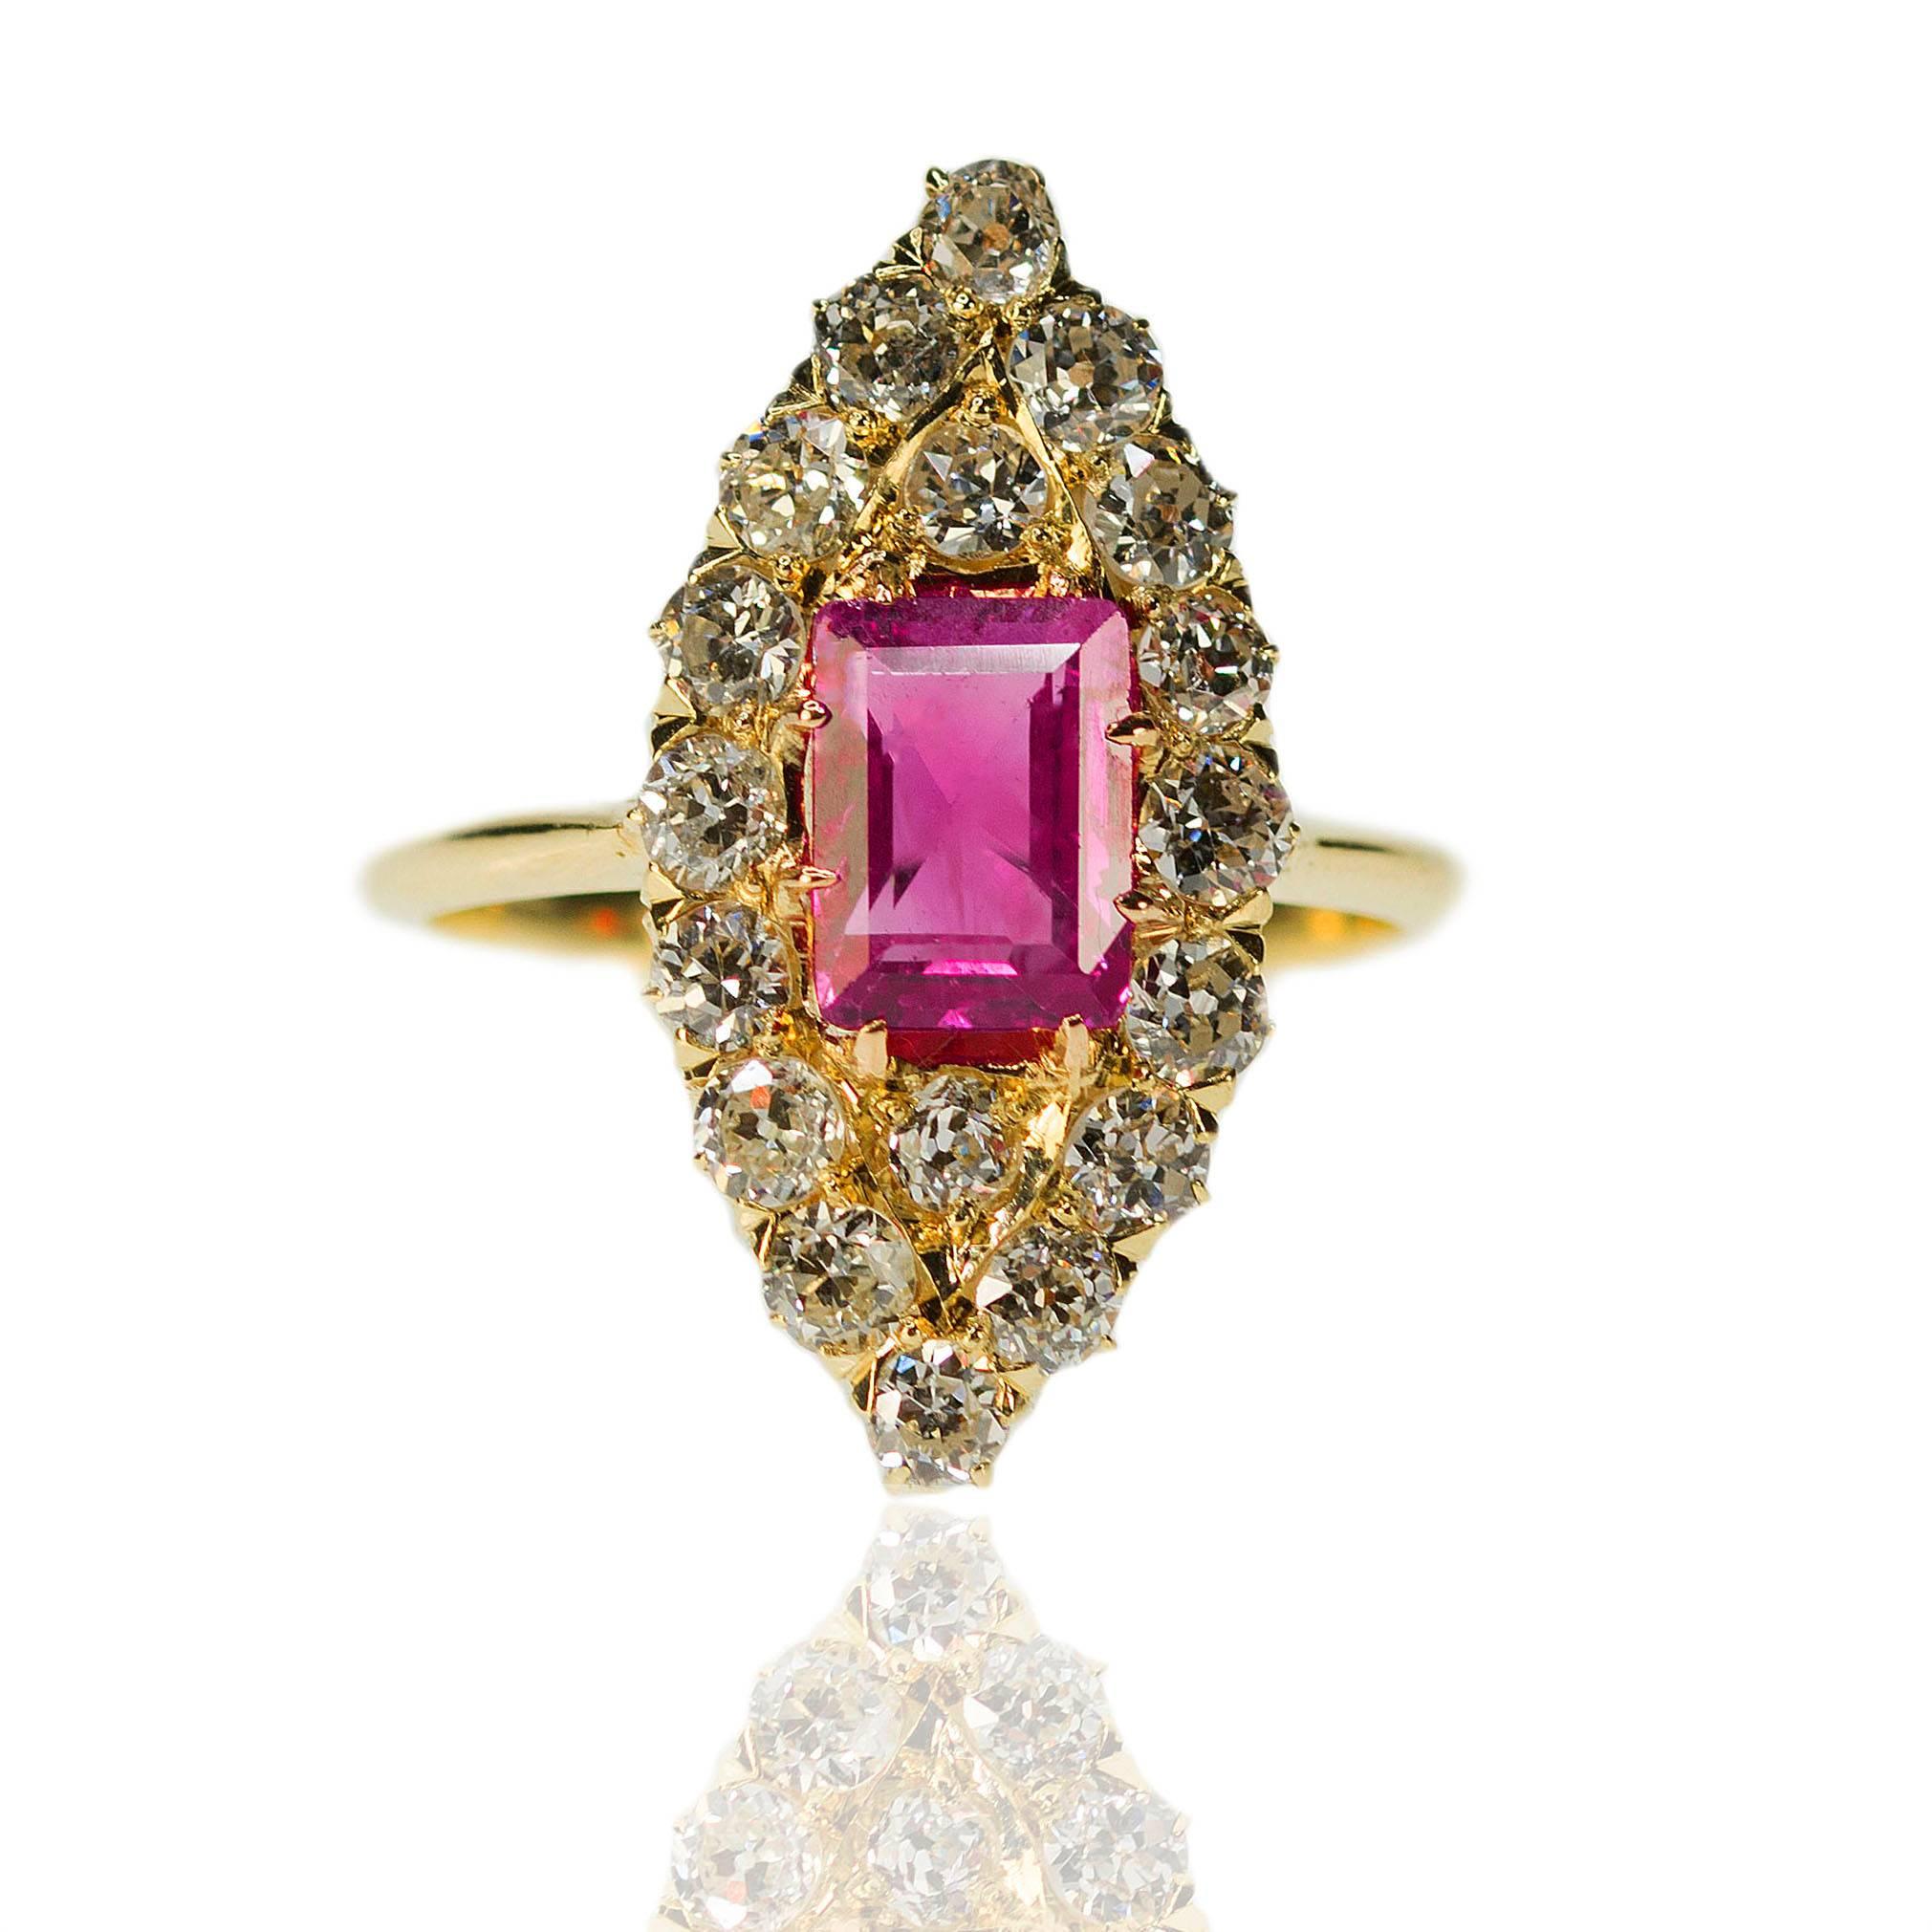 AGL Certified 2.12 Burma No Heat Pink Sapphire set in Edwardian 18k mounting with 18 Old Euro's weighing approximately 1.80 carats 5.24g